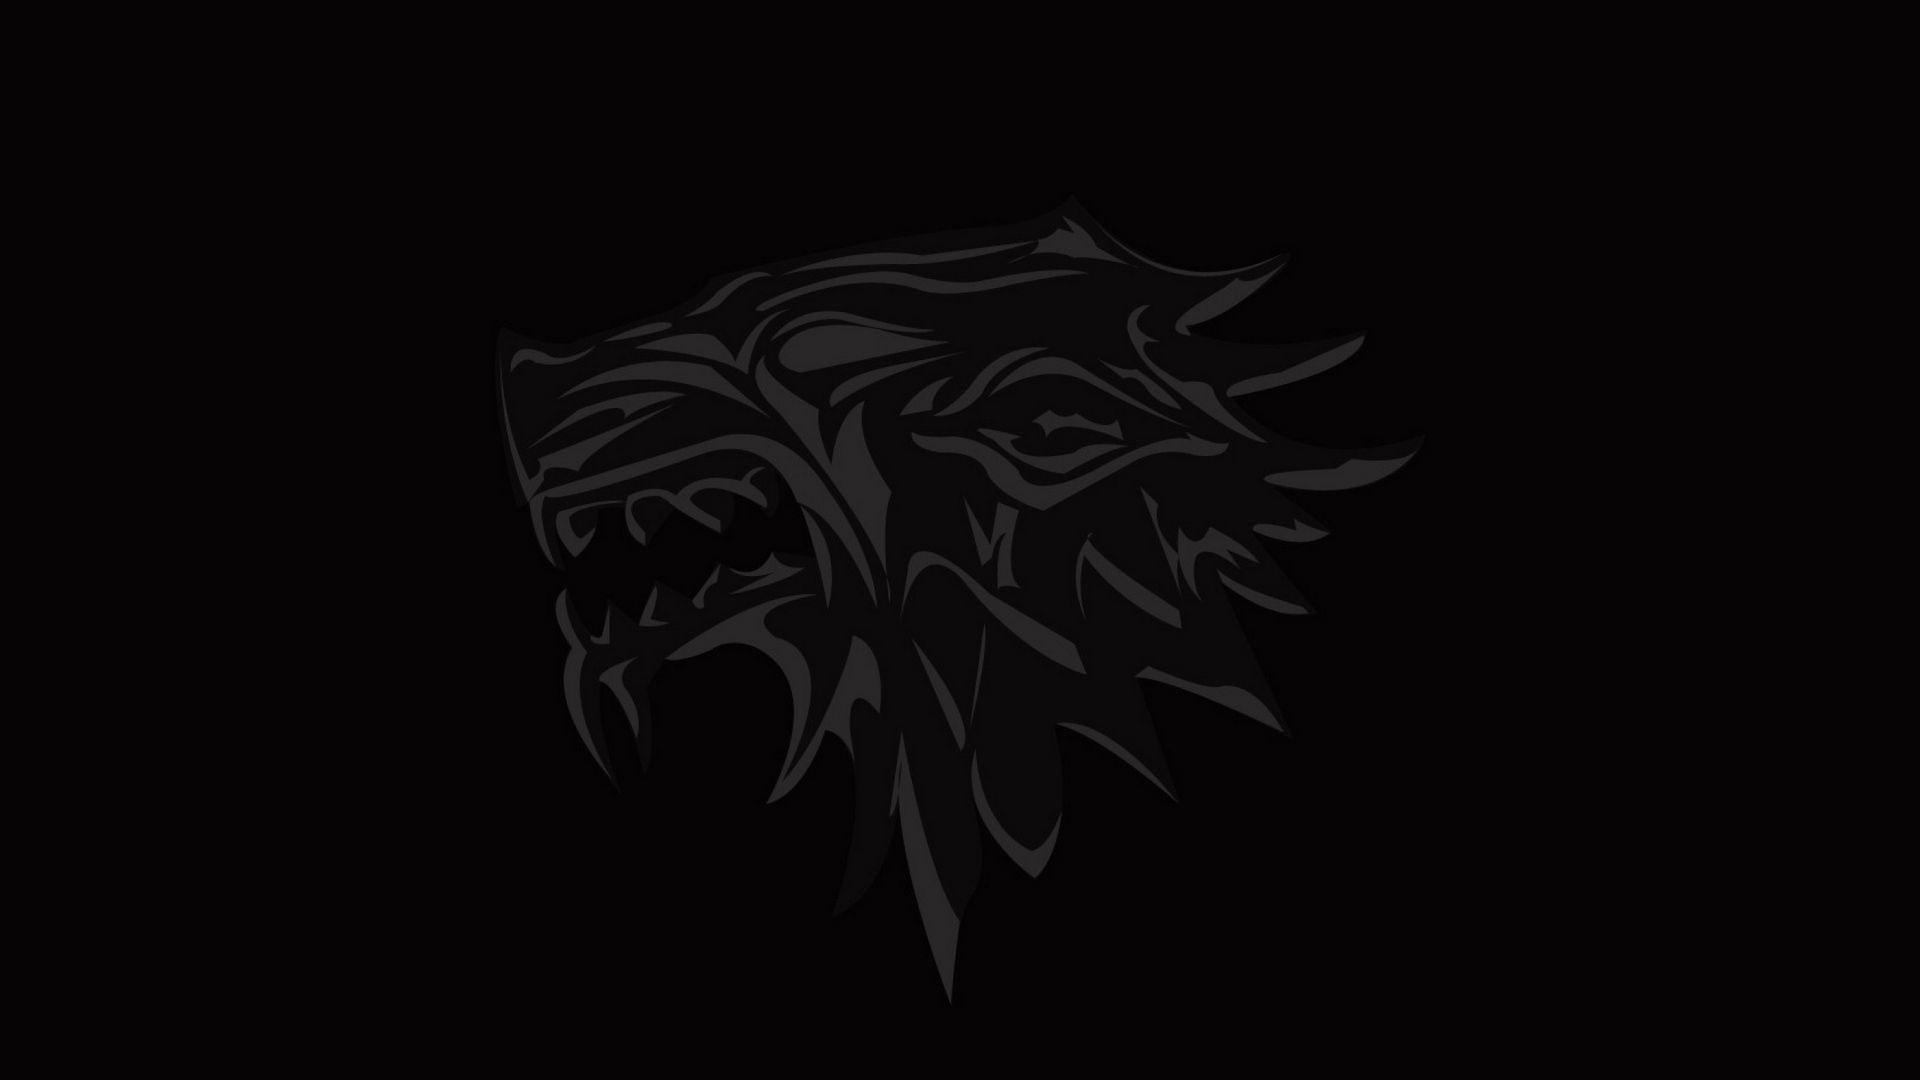 Download wallpaper 1920x1080 house of stark, game of thrones, logo